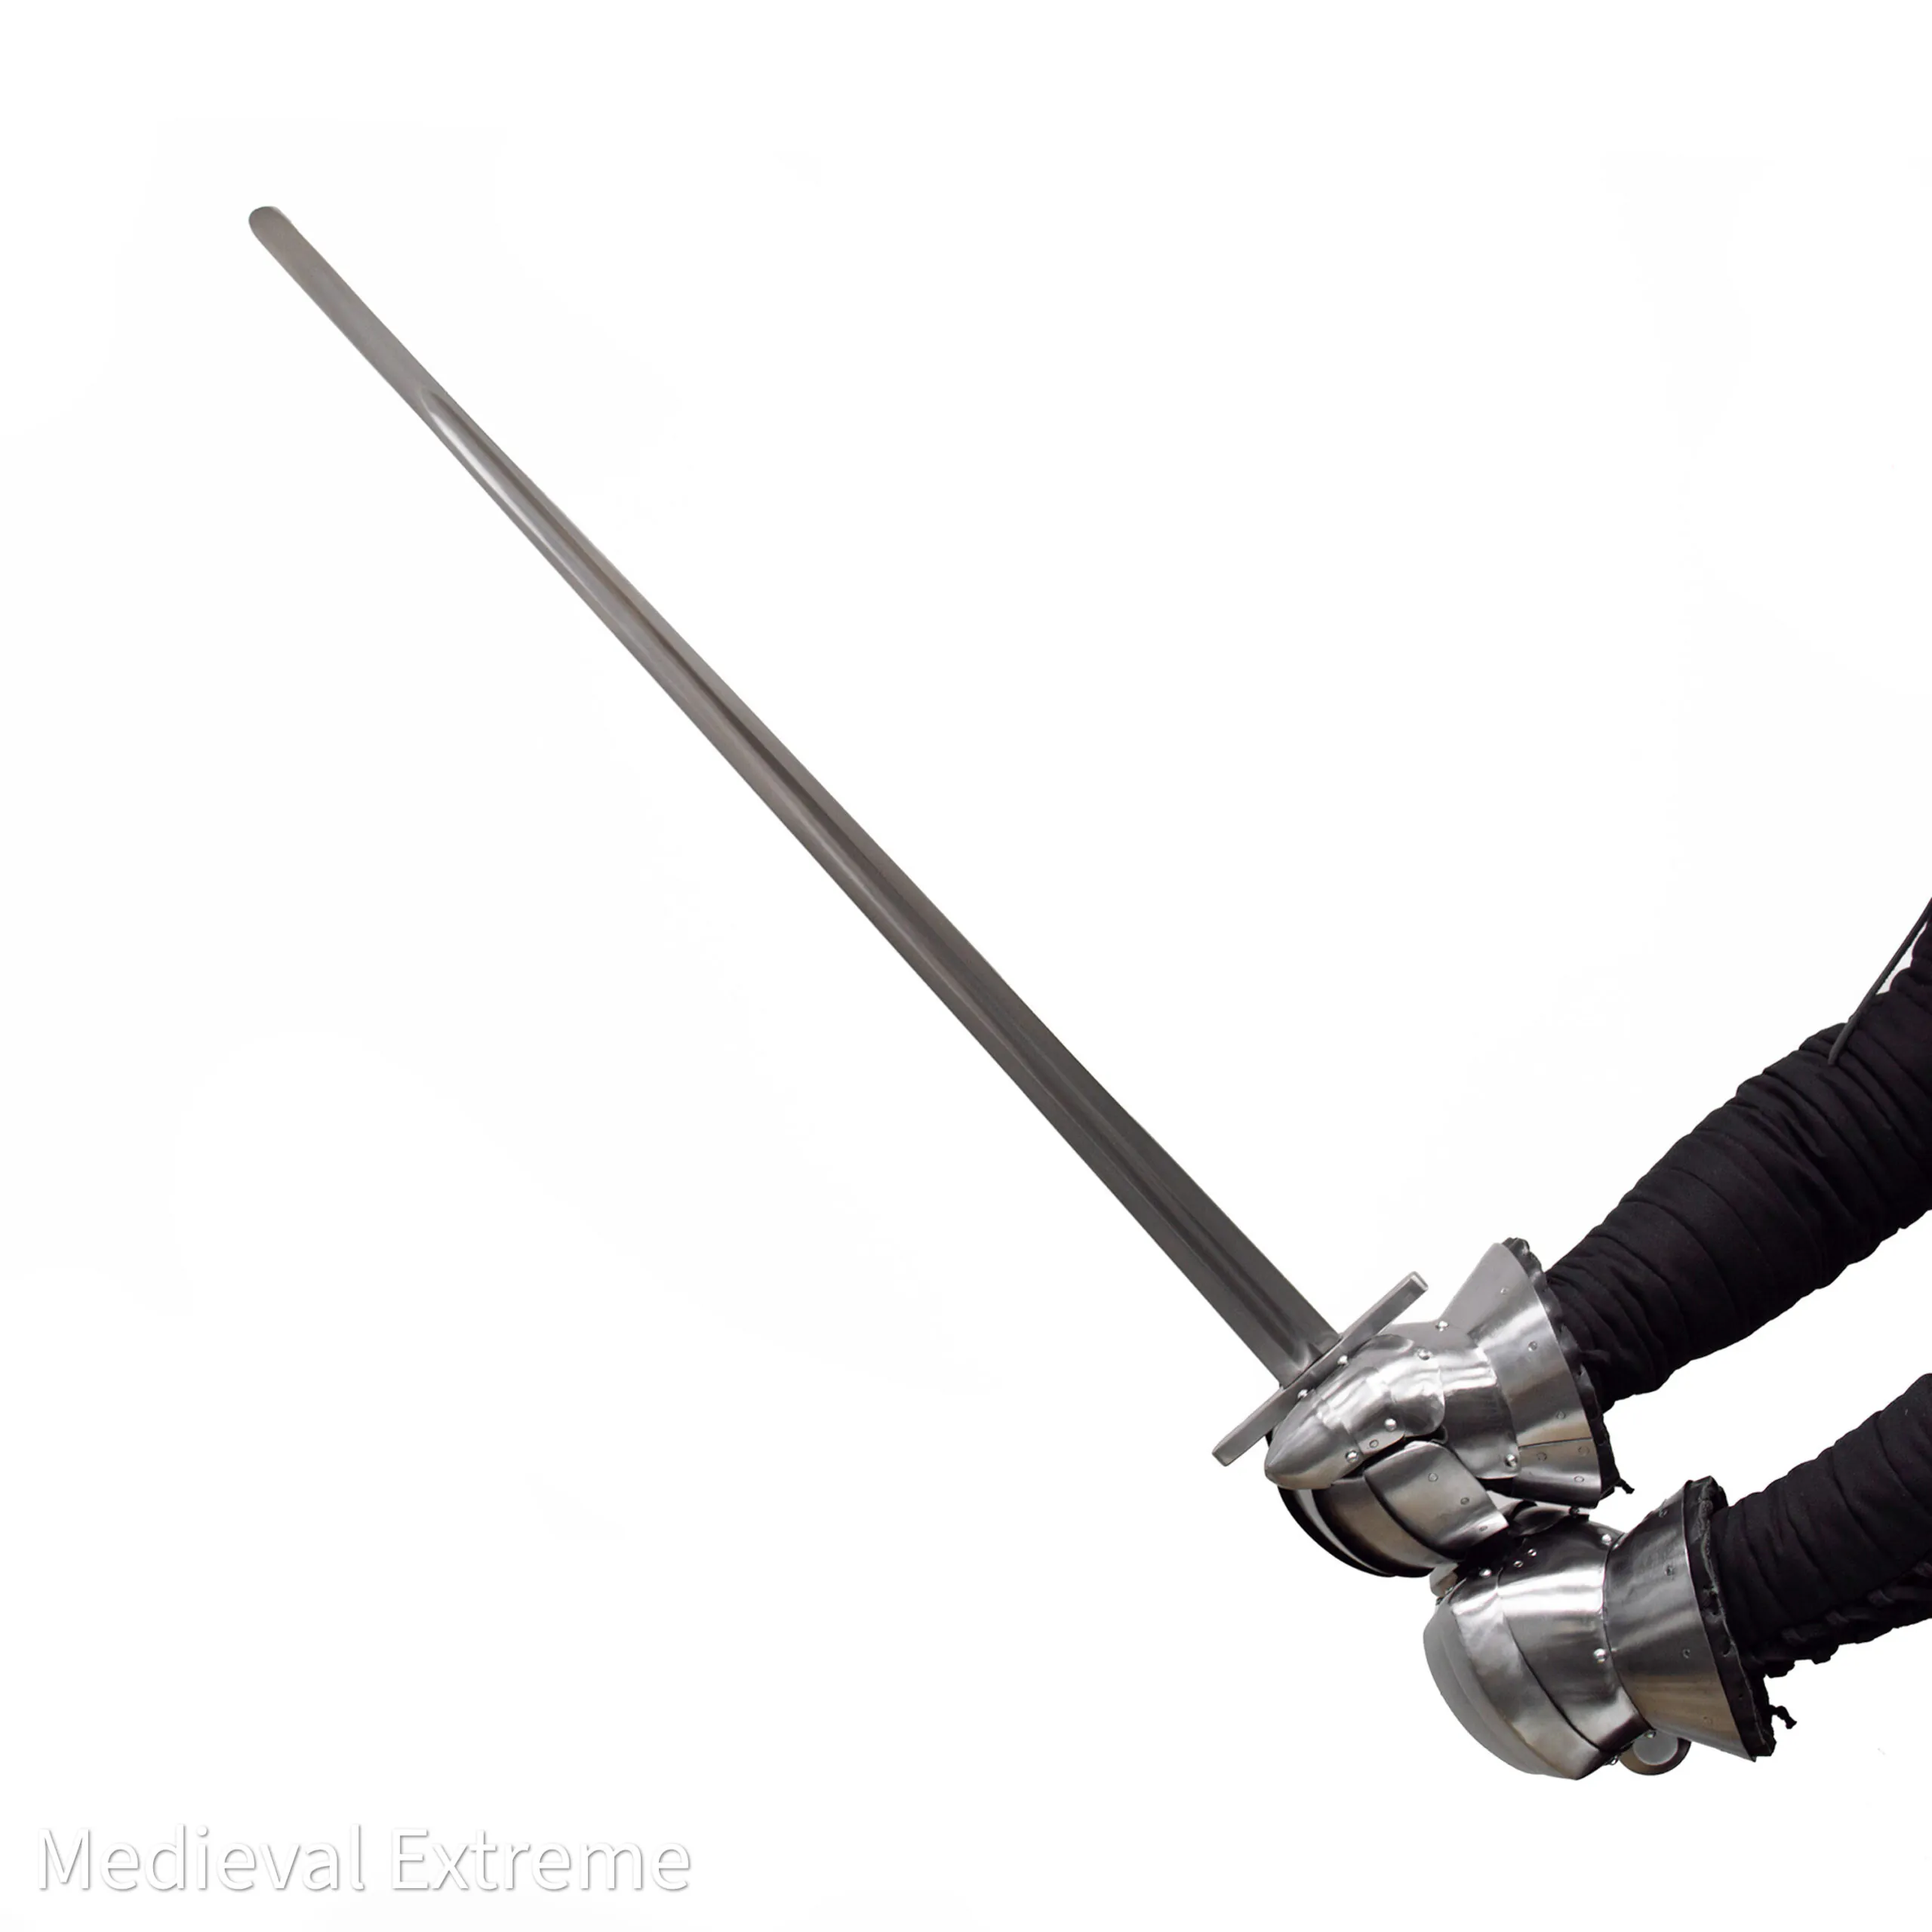 Basic longsword for armored combat in hands